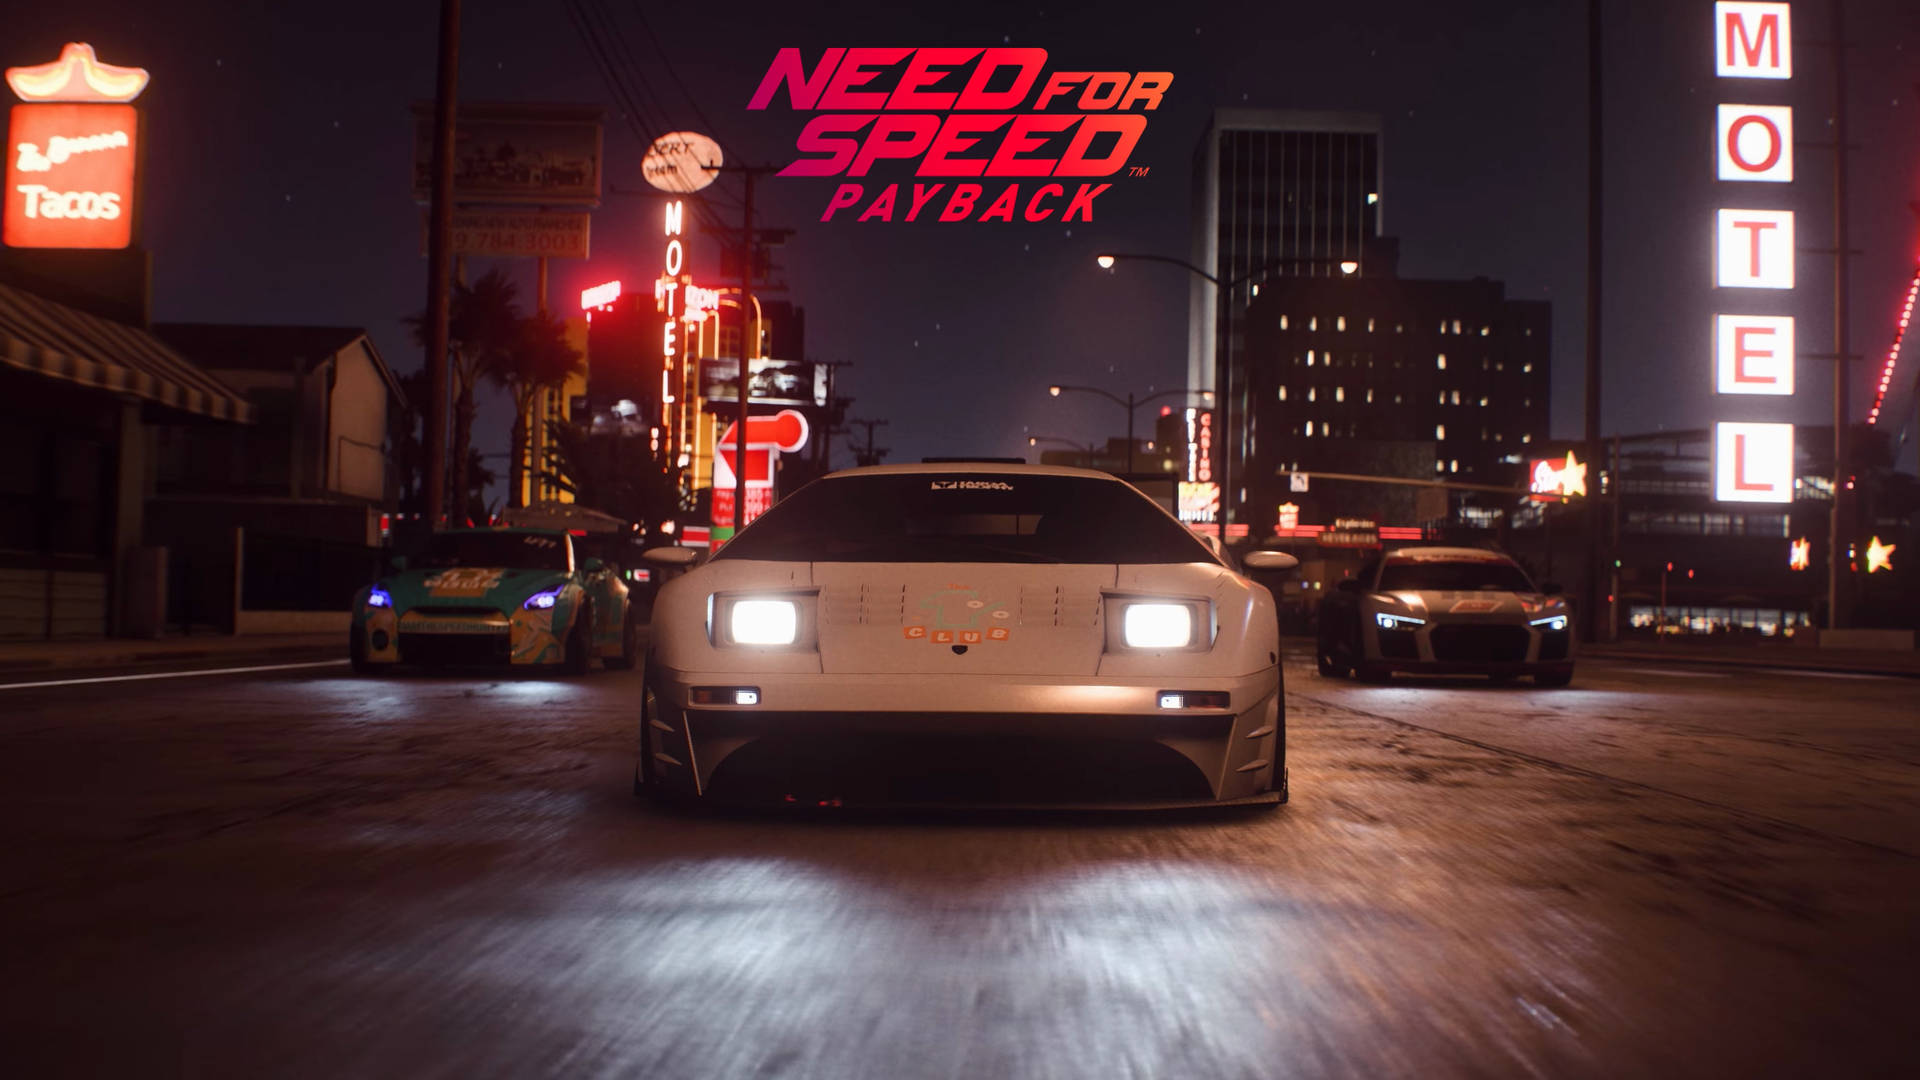 Stock Image: Intense Night Race In Need For Speed Payback